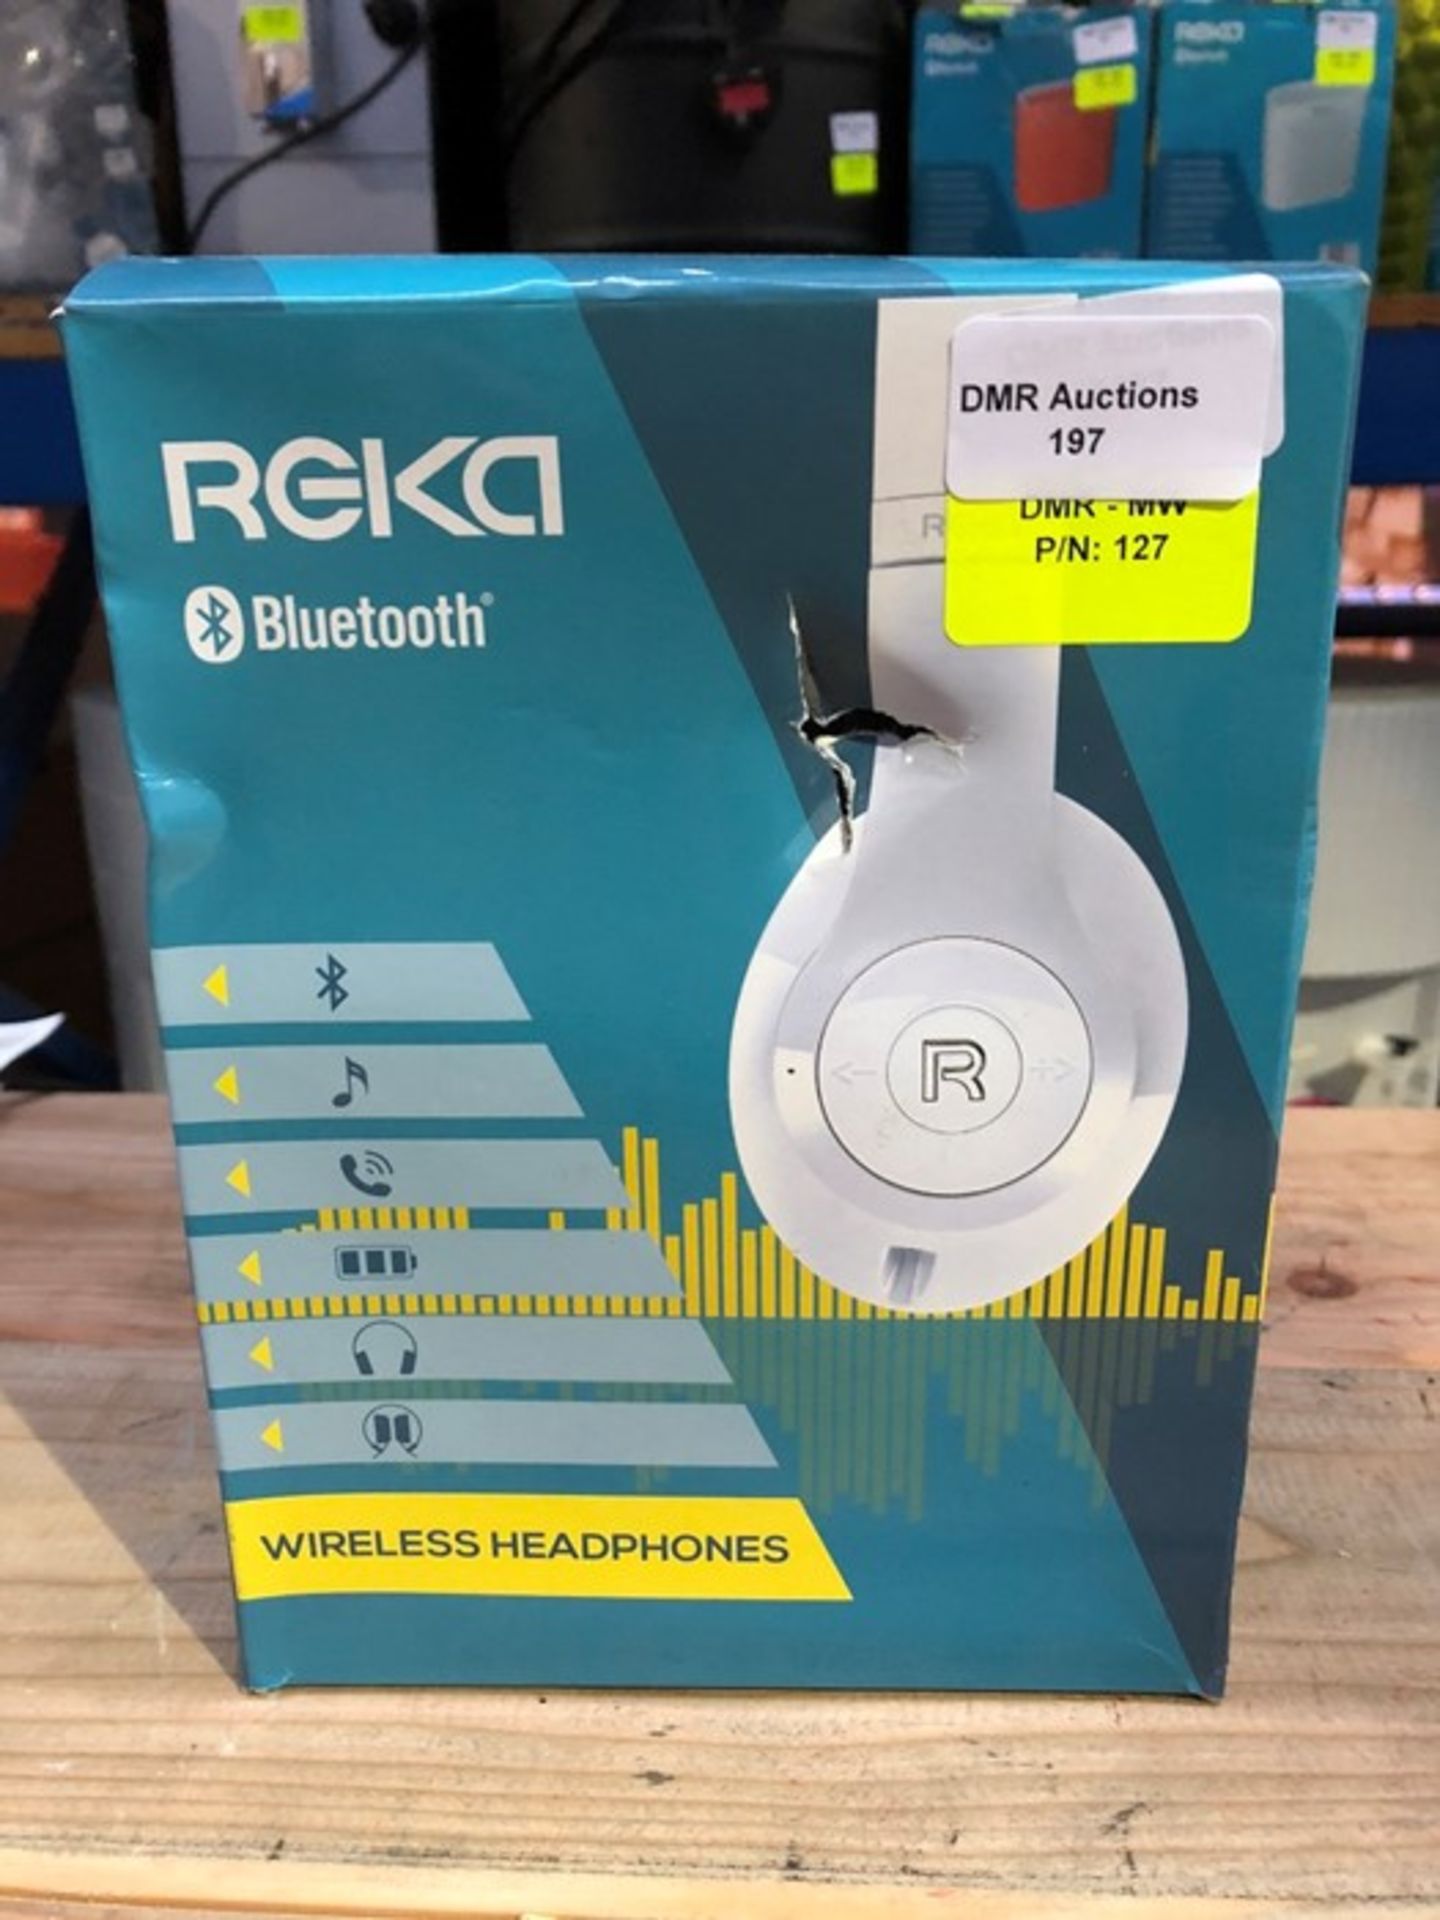 1 BOXED REKA BLUETOOTH WIRELESS HEADPHONES / RRP £25.98 (PUBLIC VIEWING AVAILABLE)